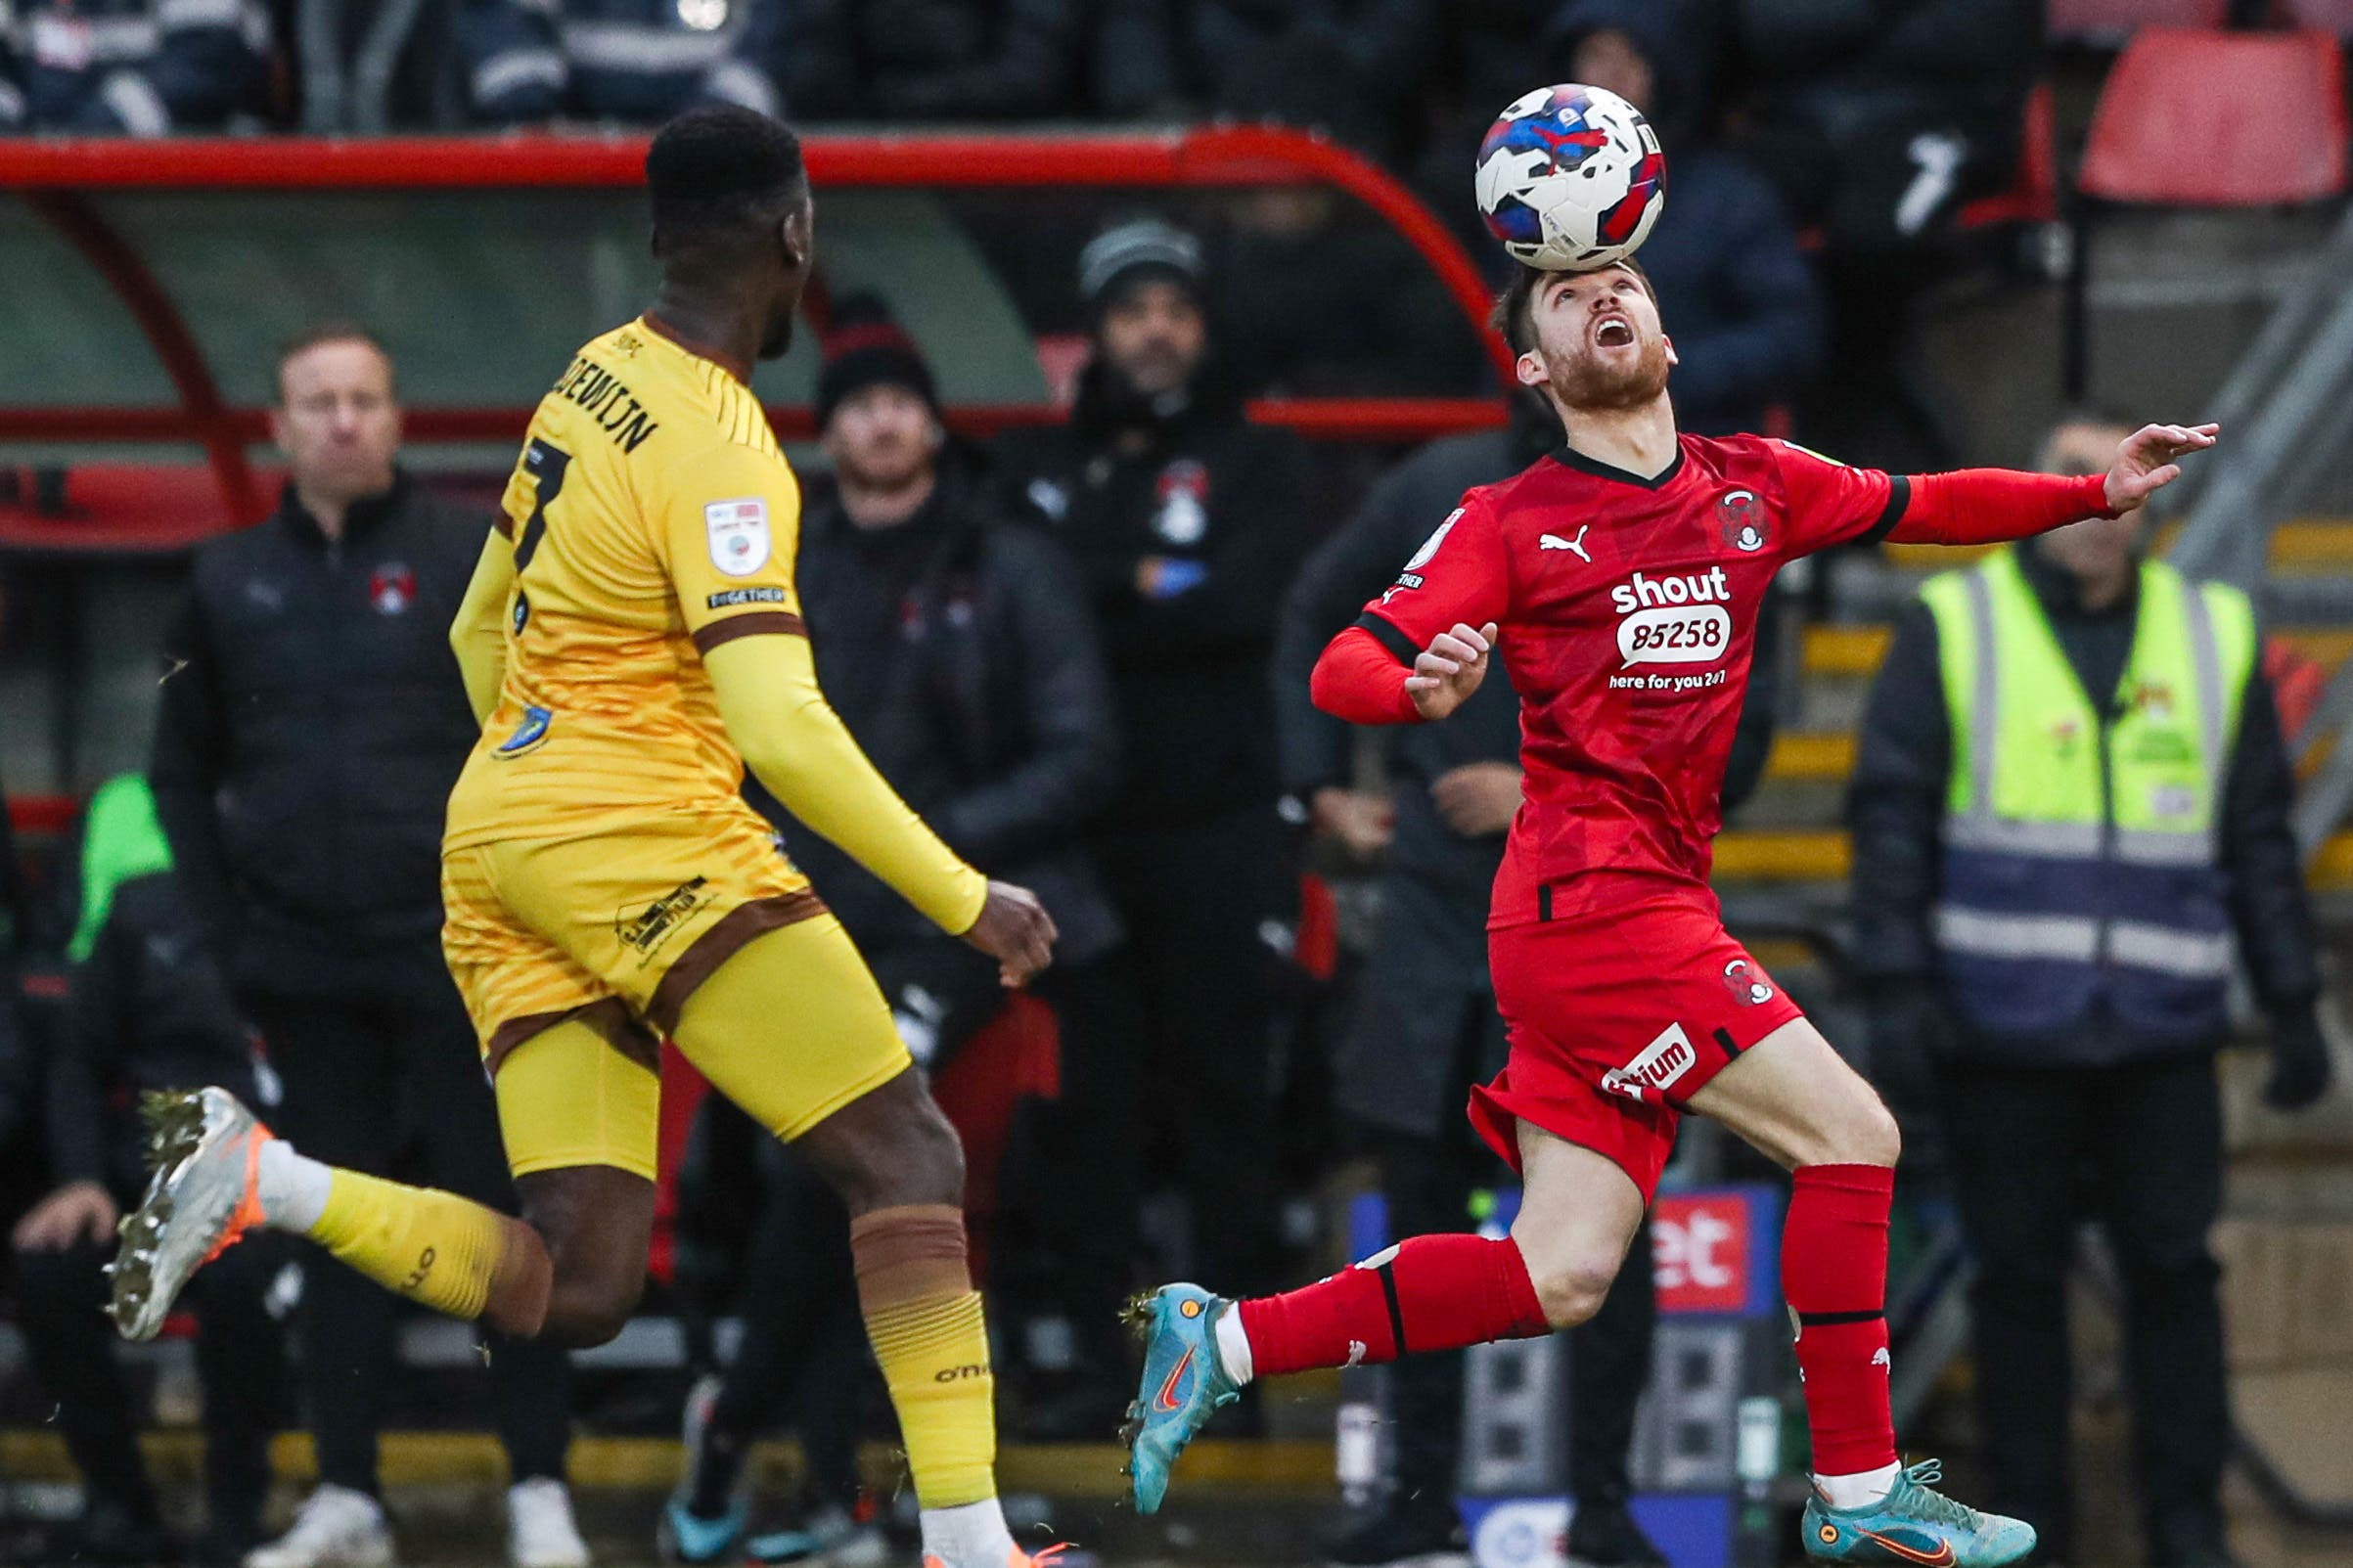 Paul Smyth is finally showing his potential in English football and wants to fire Leyton Orient to the Sky Bet League Two title (Kieran Cleeves/PA)